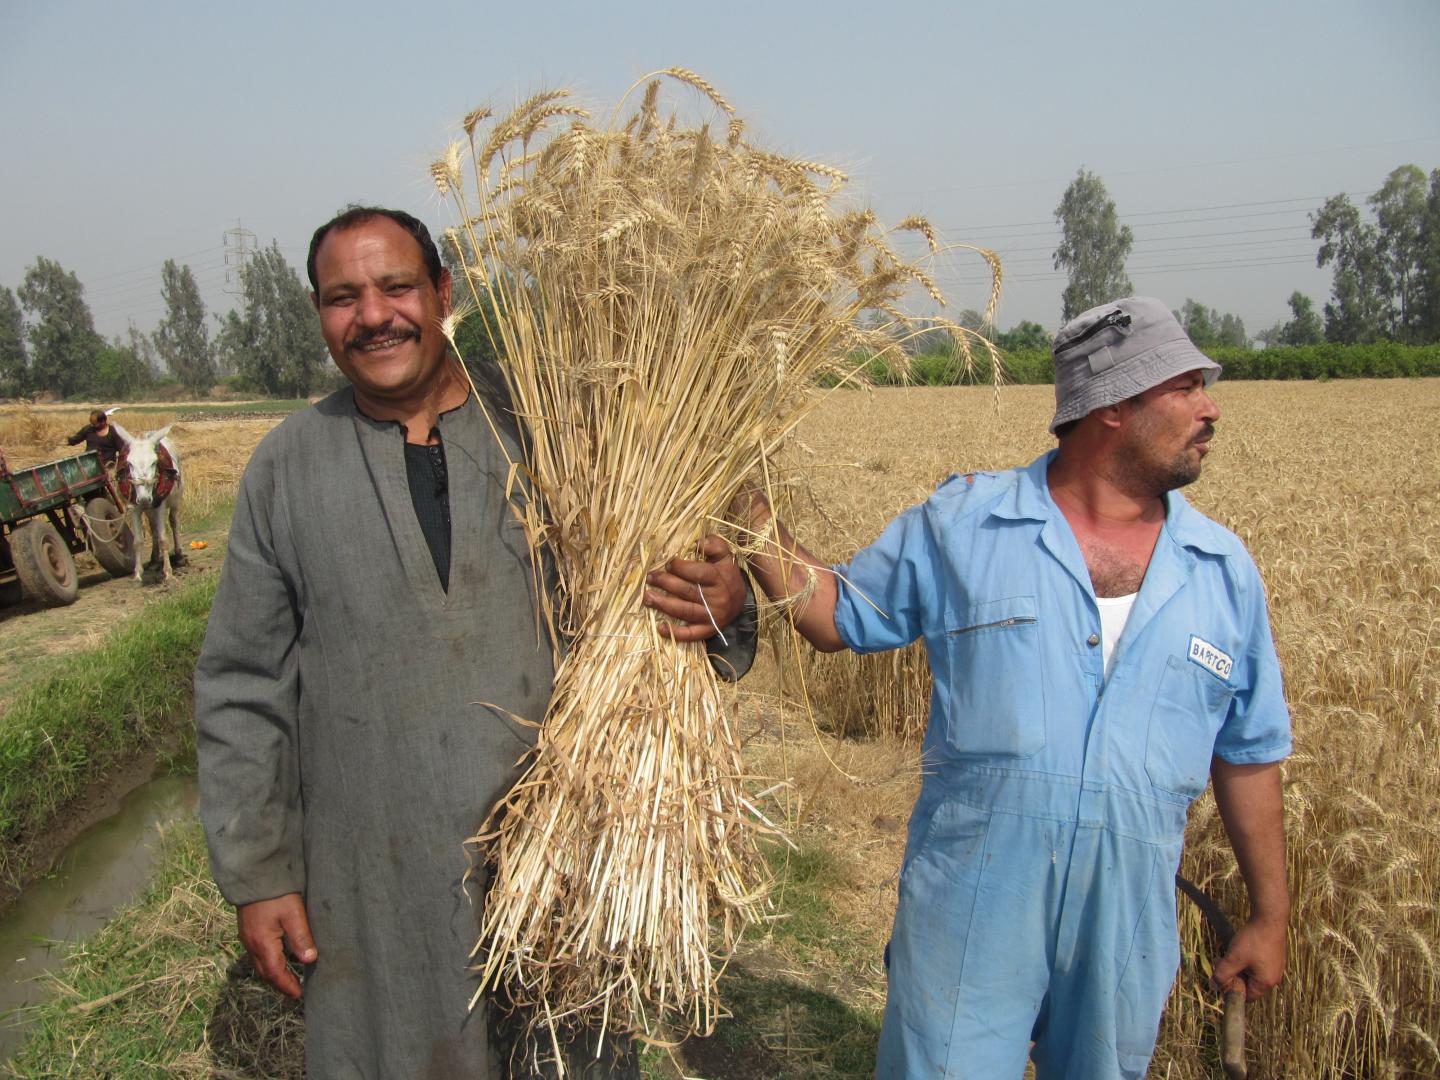 Farmer in Al-Sharkia, Egypt, Enjoys Higher Wheat Yield with Less Irrigation Water Use